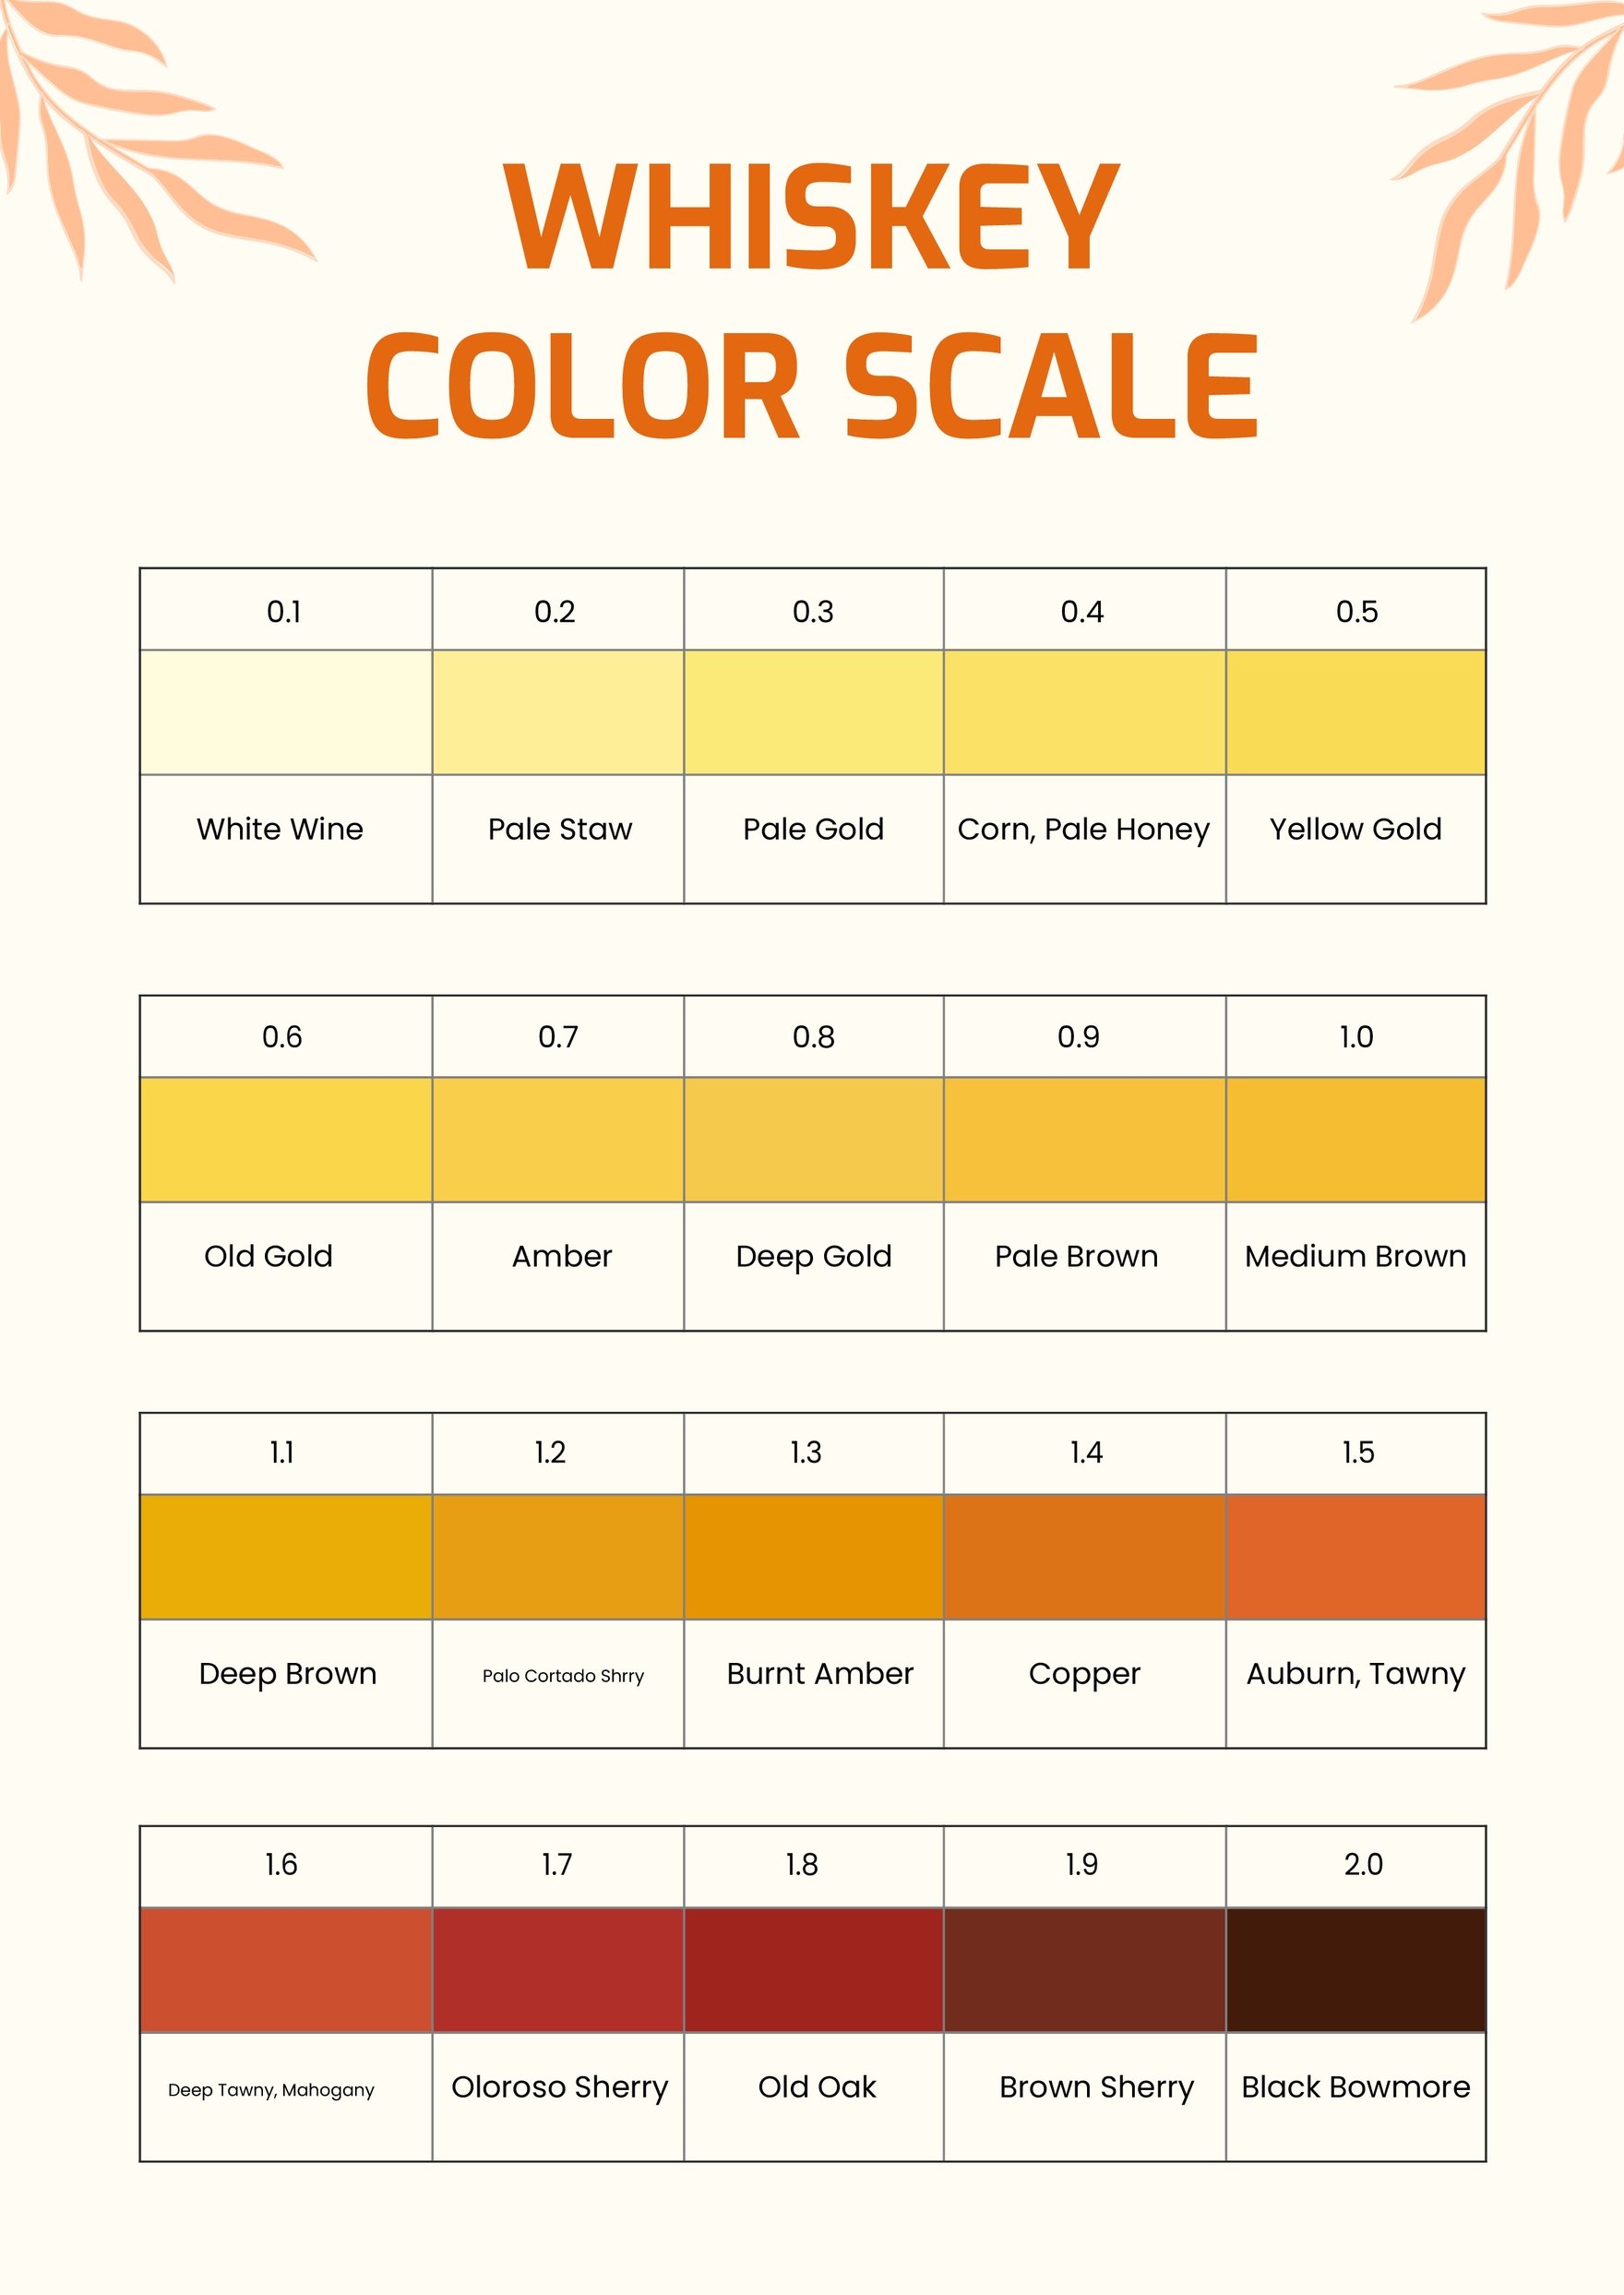 Whiskey Color Scale Chart in PDF, Illustrator